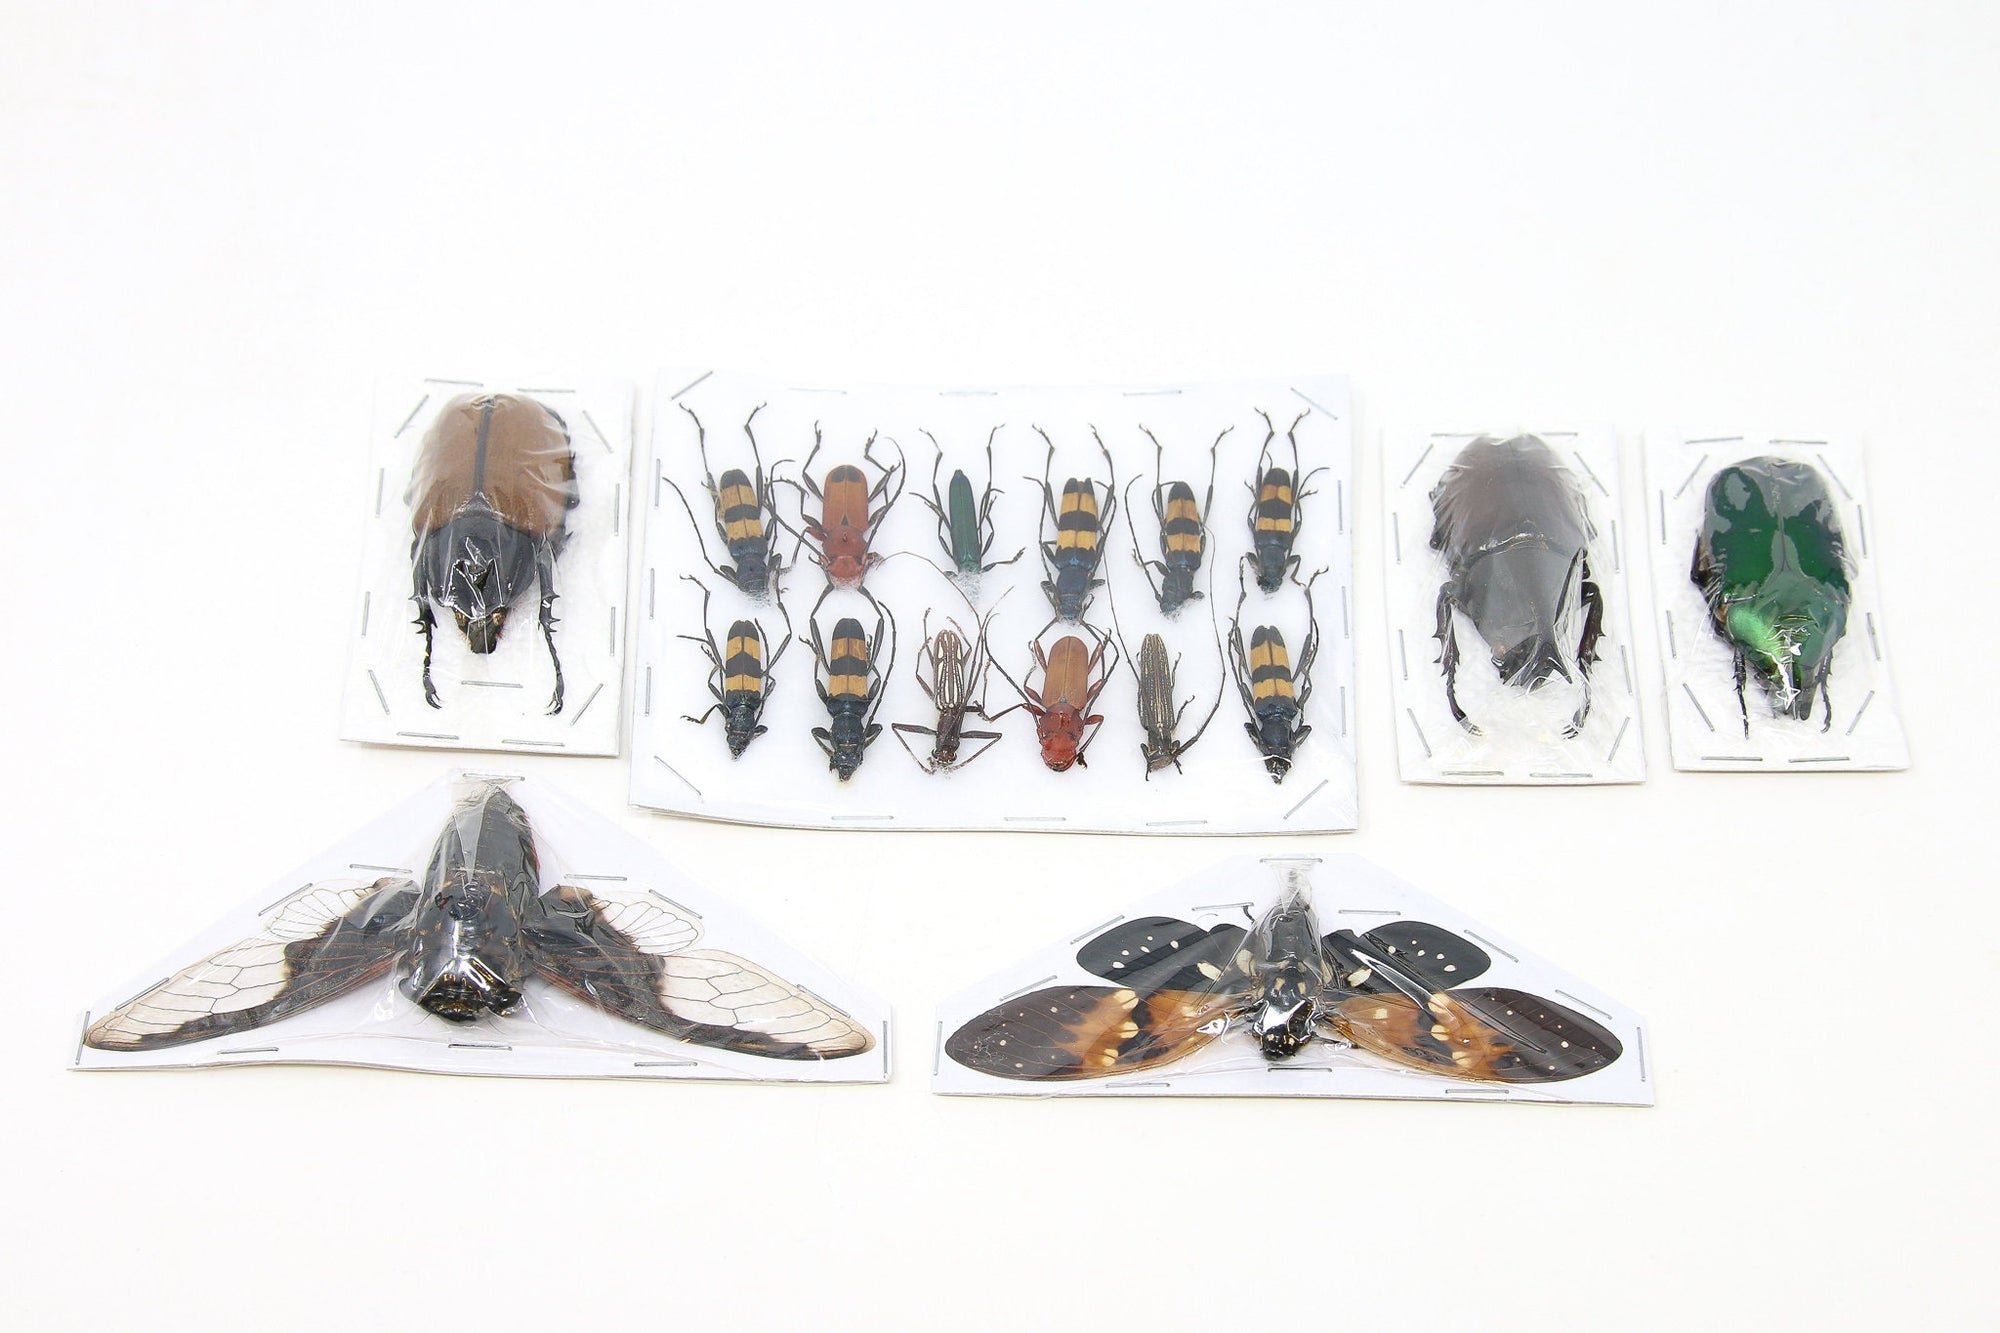 Mixed Assorted Insects Bug Collection, A1 Quality Real Dry-Preserved Specimens, Entomology Taxidermy Curiosities (LOT*128)